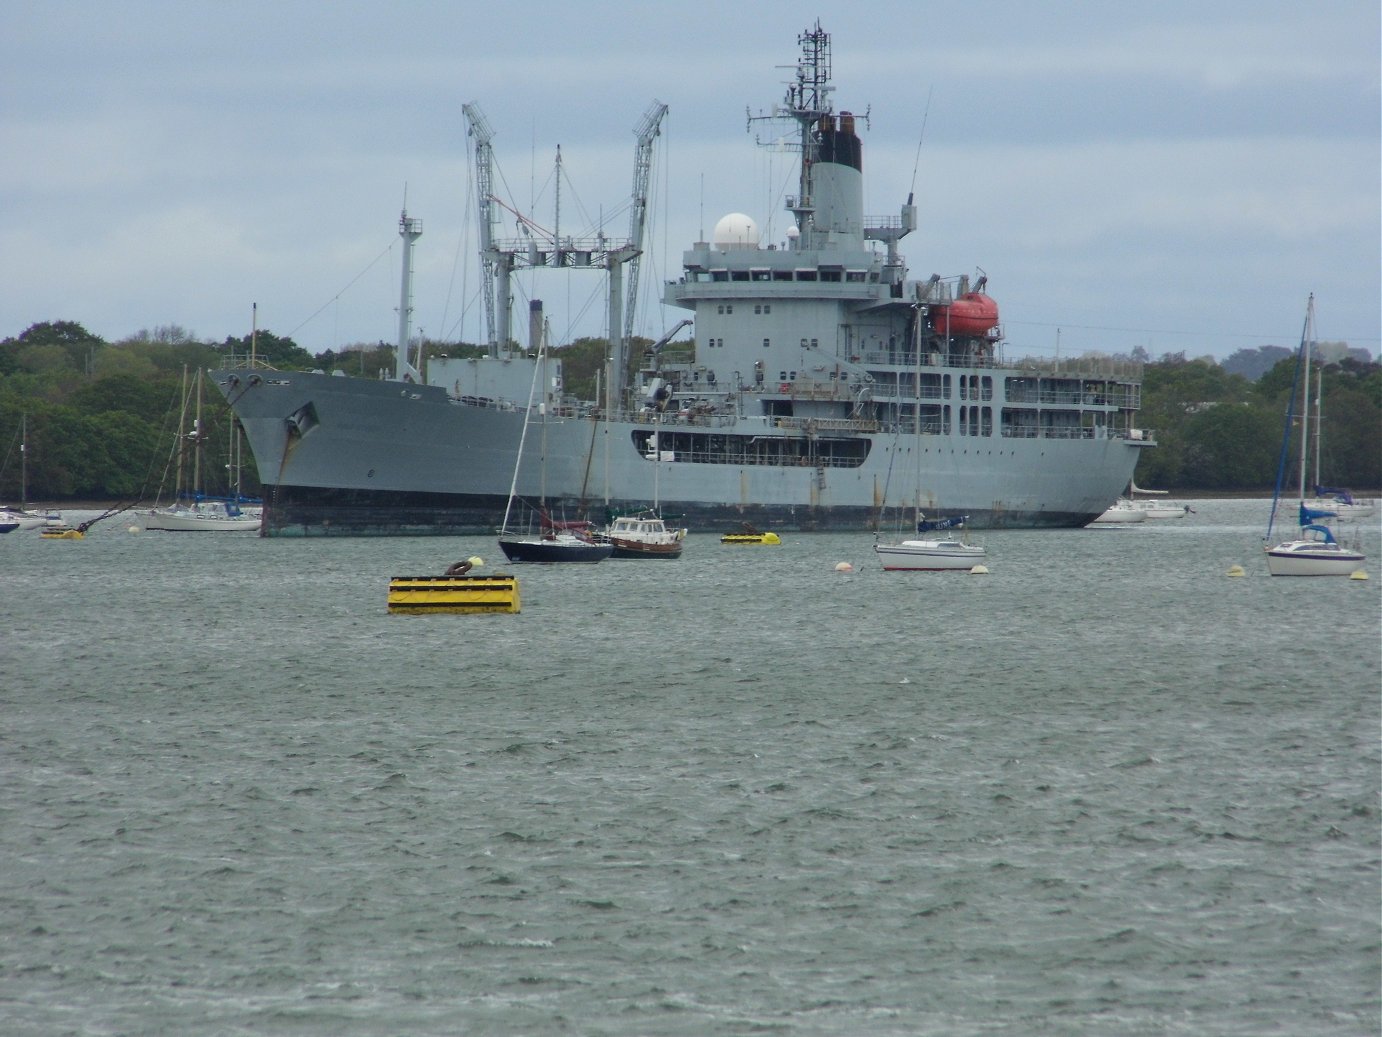 RFA Gold Rover, Decommissioned Portsmouth 24 April 2019